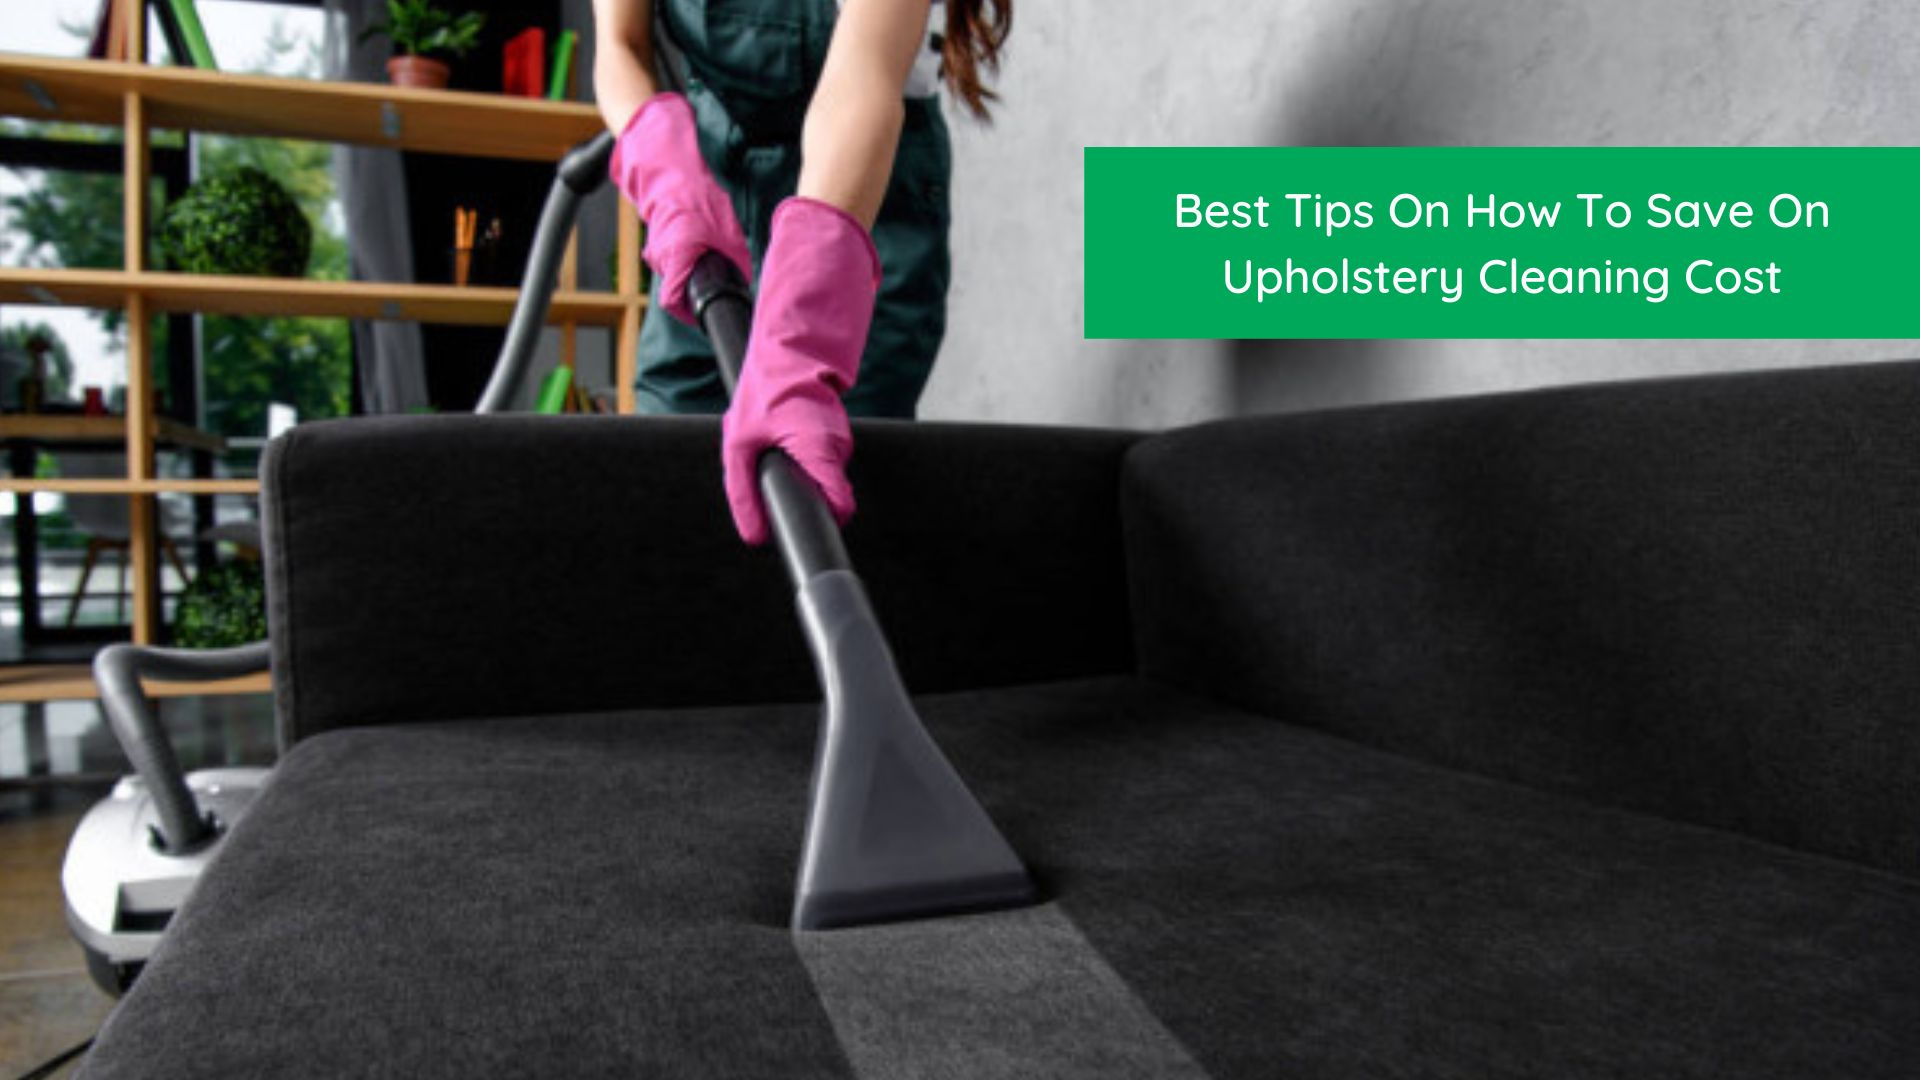 Best Tips On How To Save On Upholstery Cleaning Cost